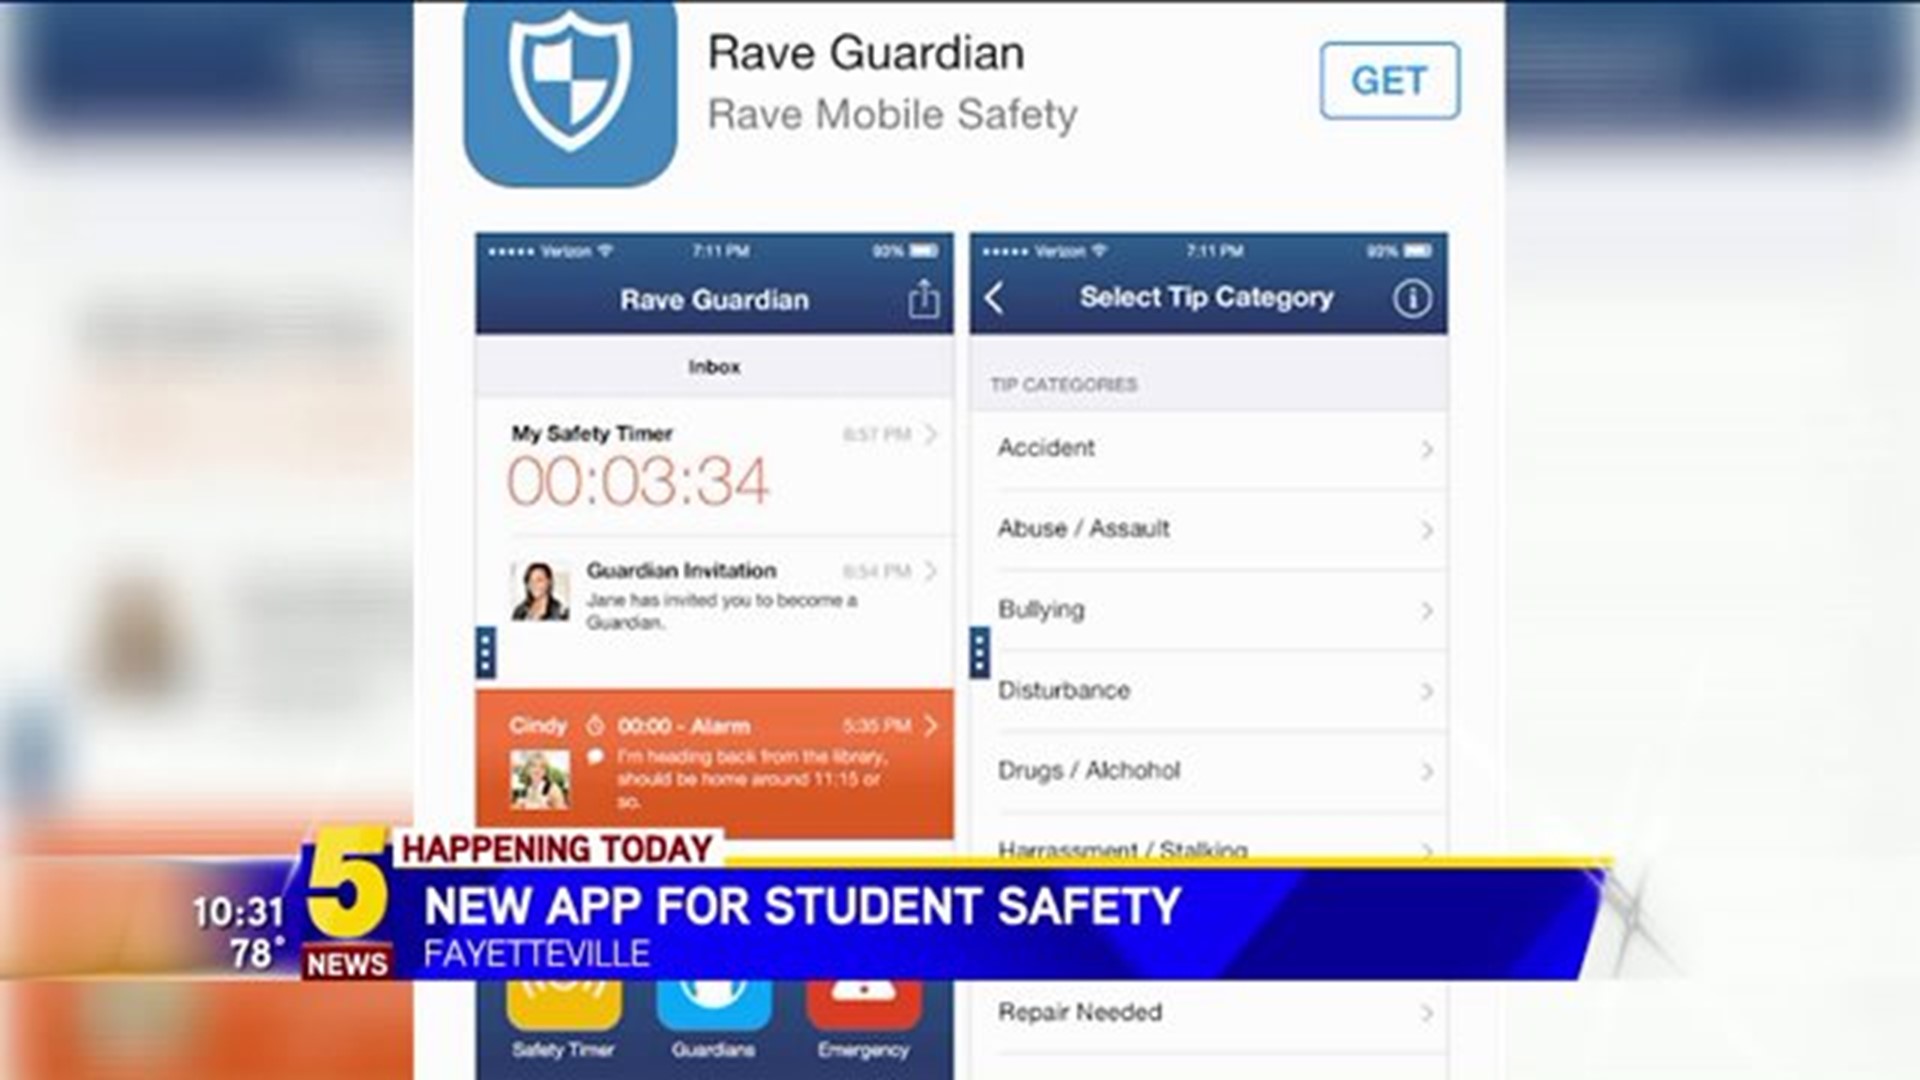 New App For Student Safety